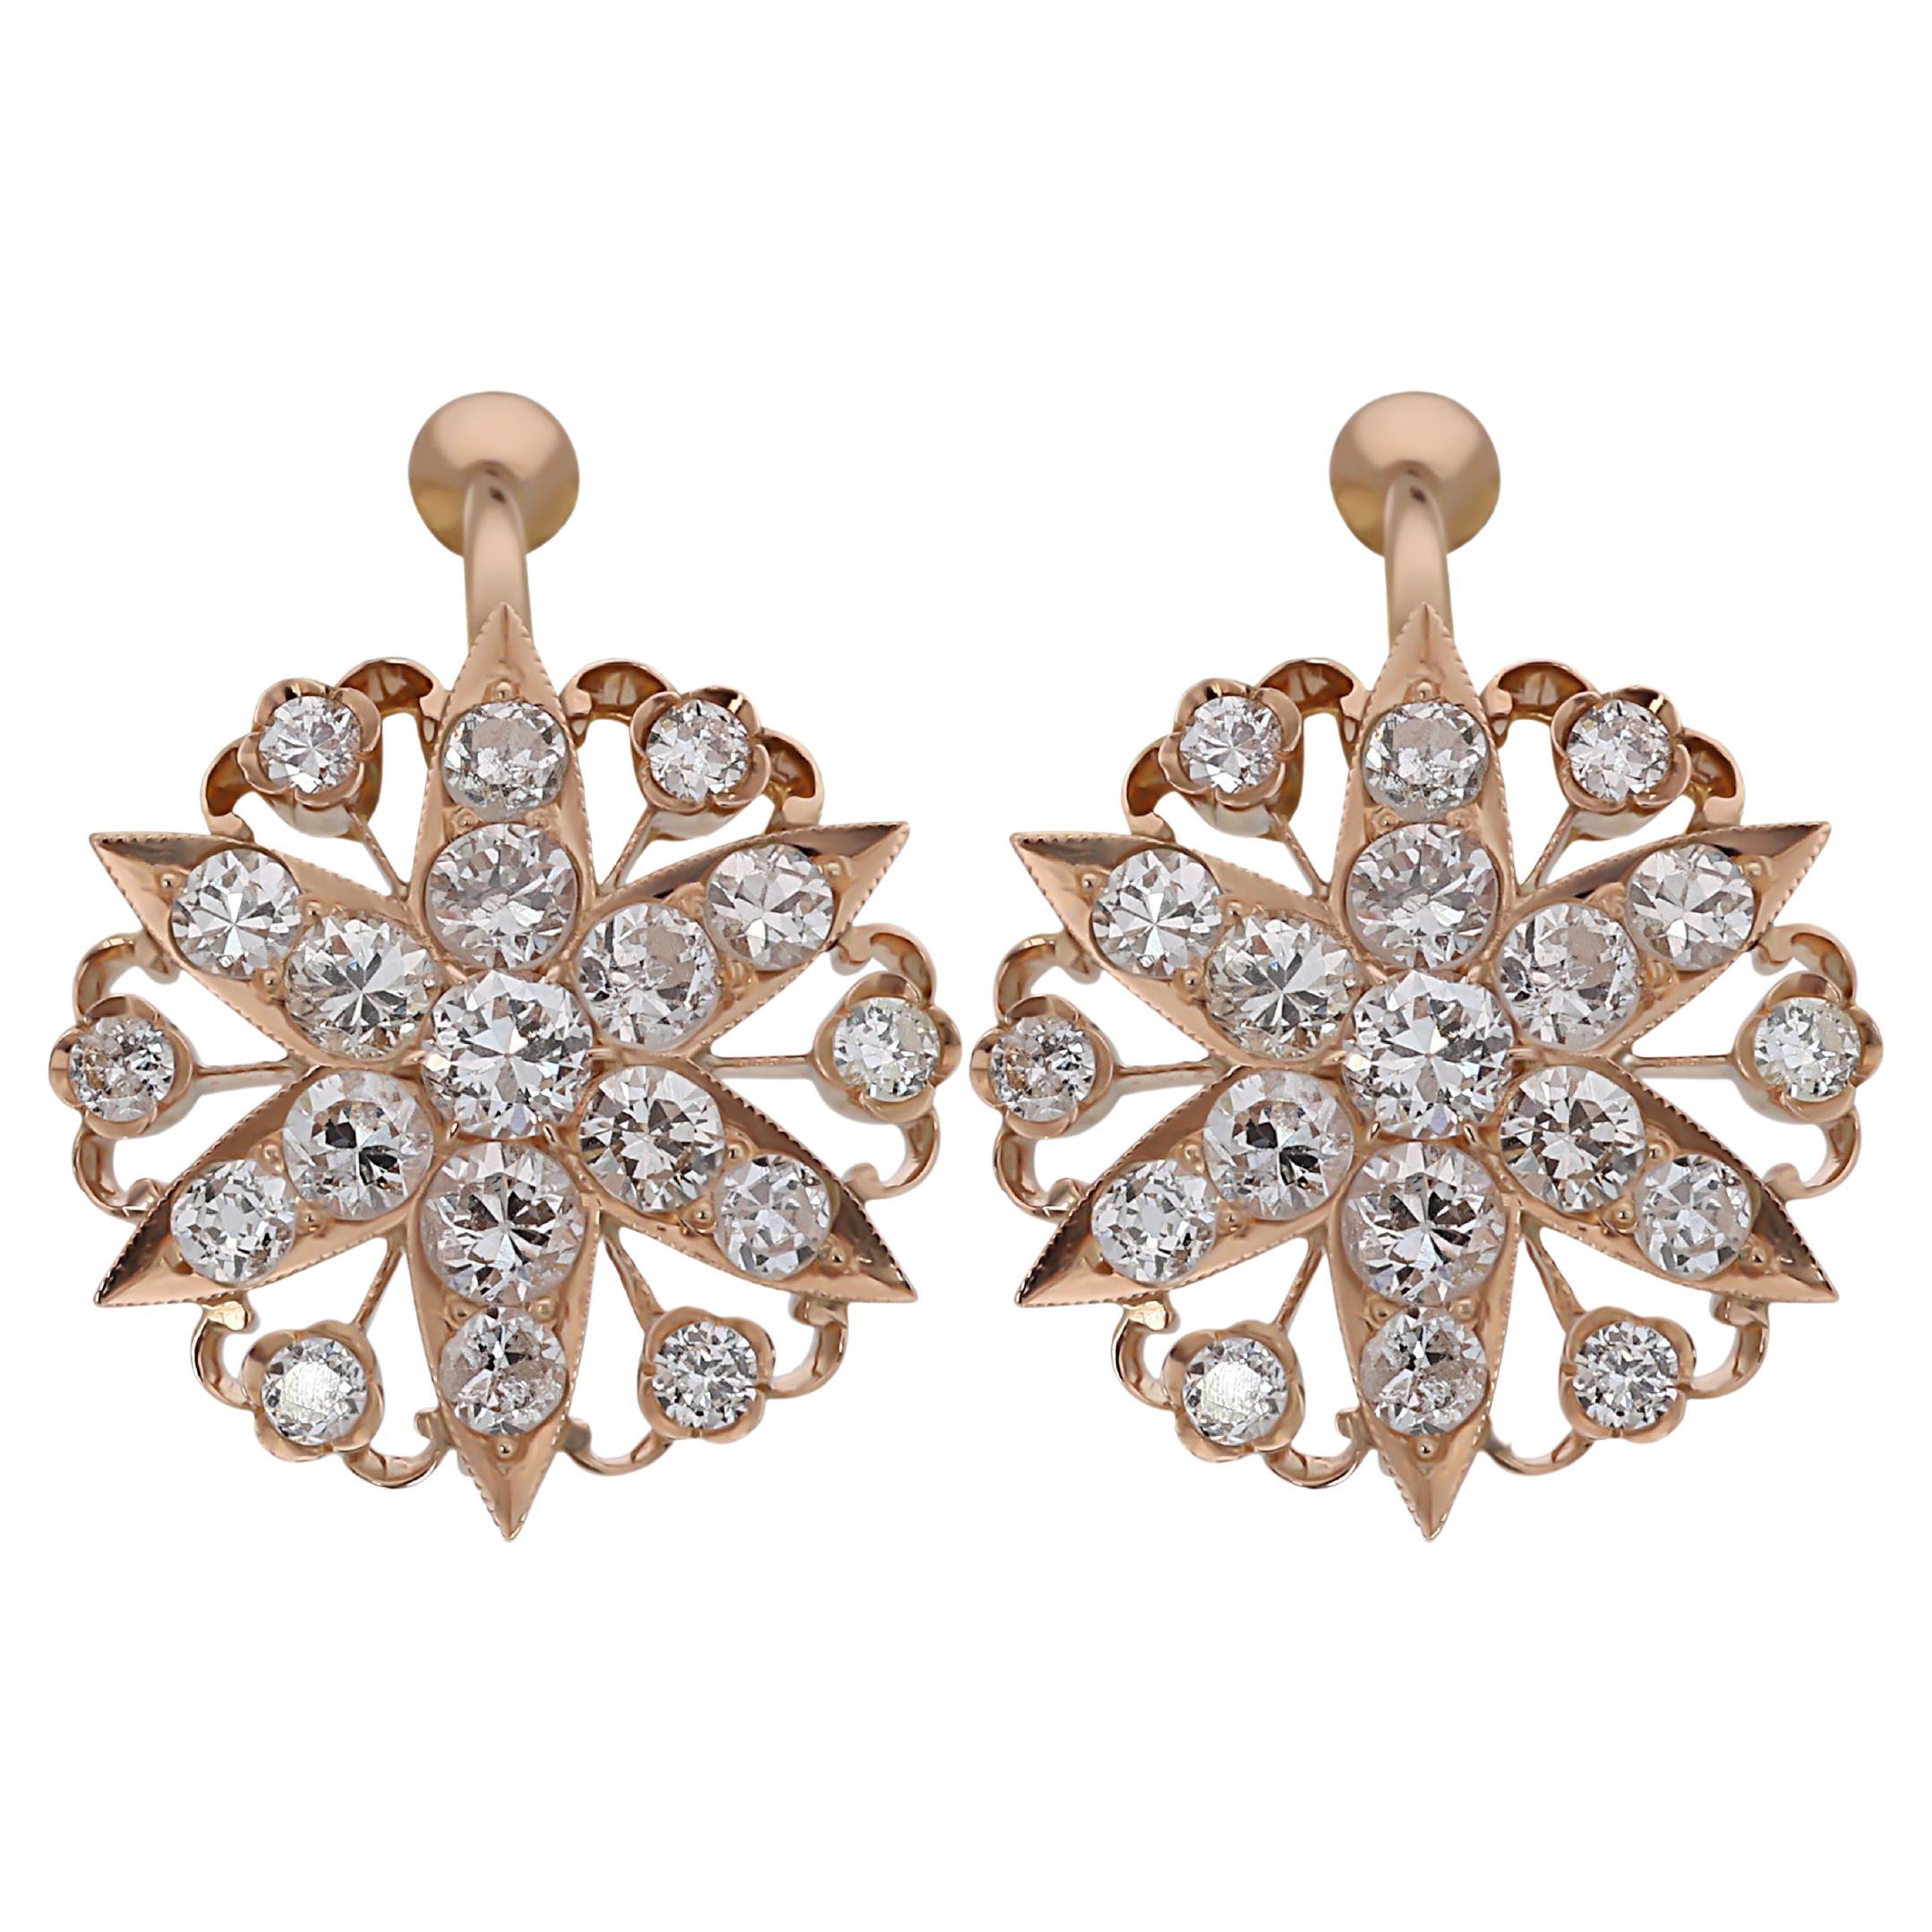 Luxurious 18k Yellow Gold Cluster Earrings with 2.06 Carat of Natural Diamonds